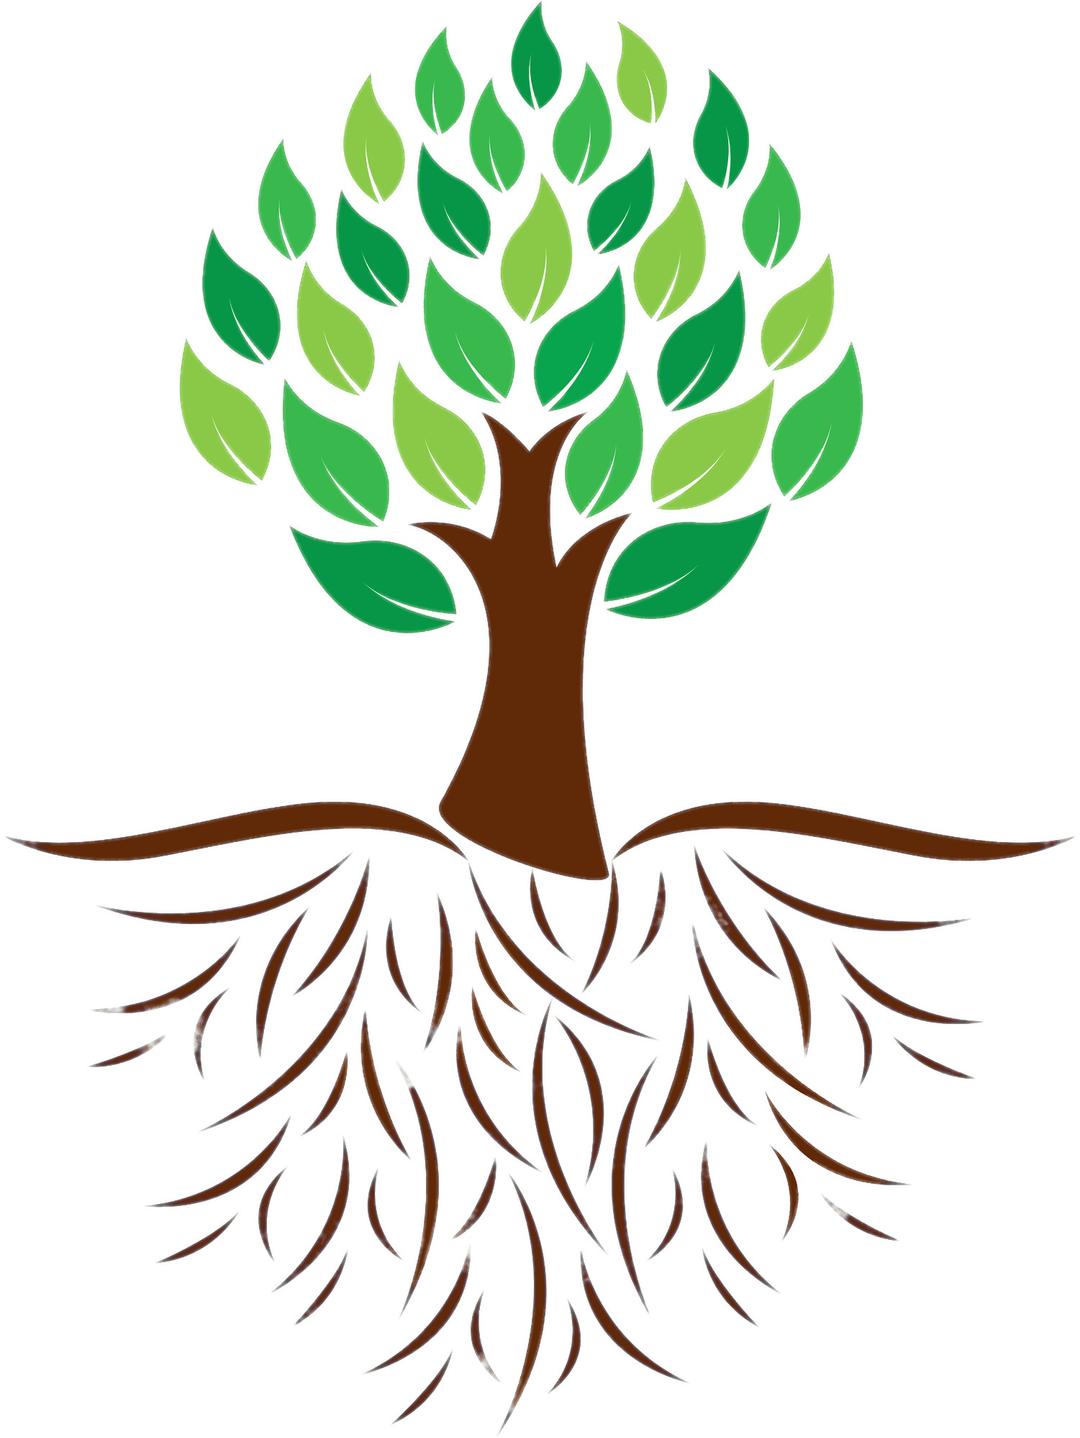 Tree and Roots Colour Illustration png transparent